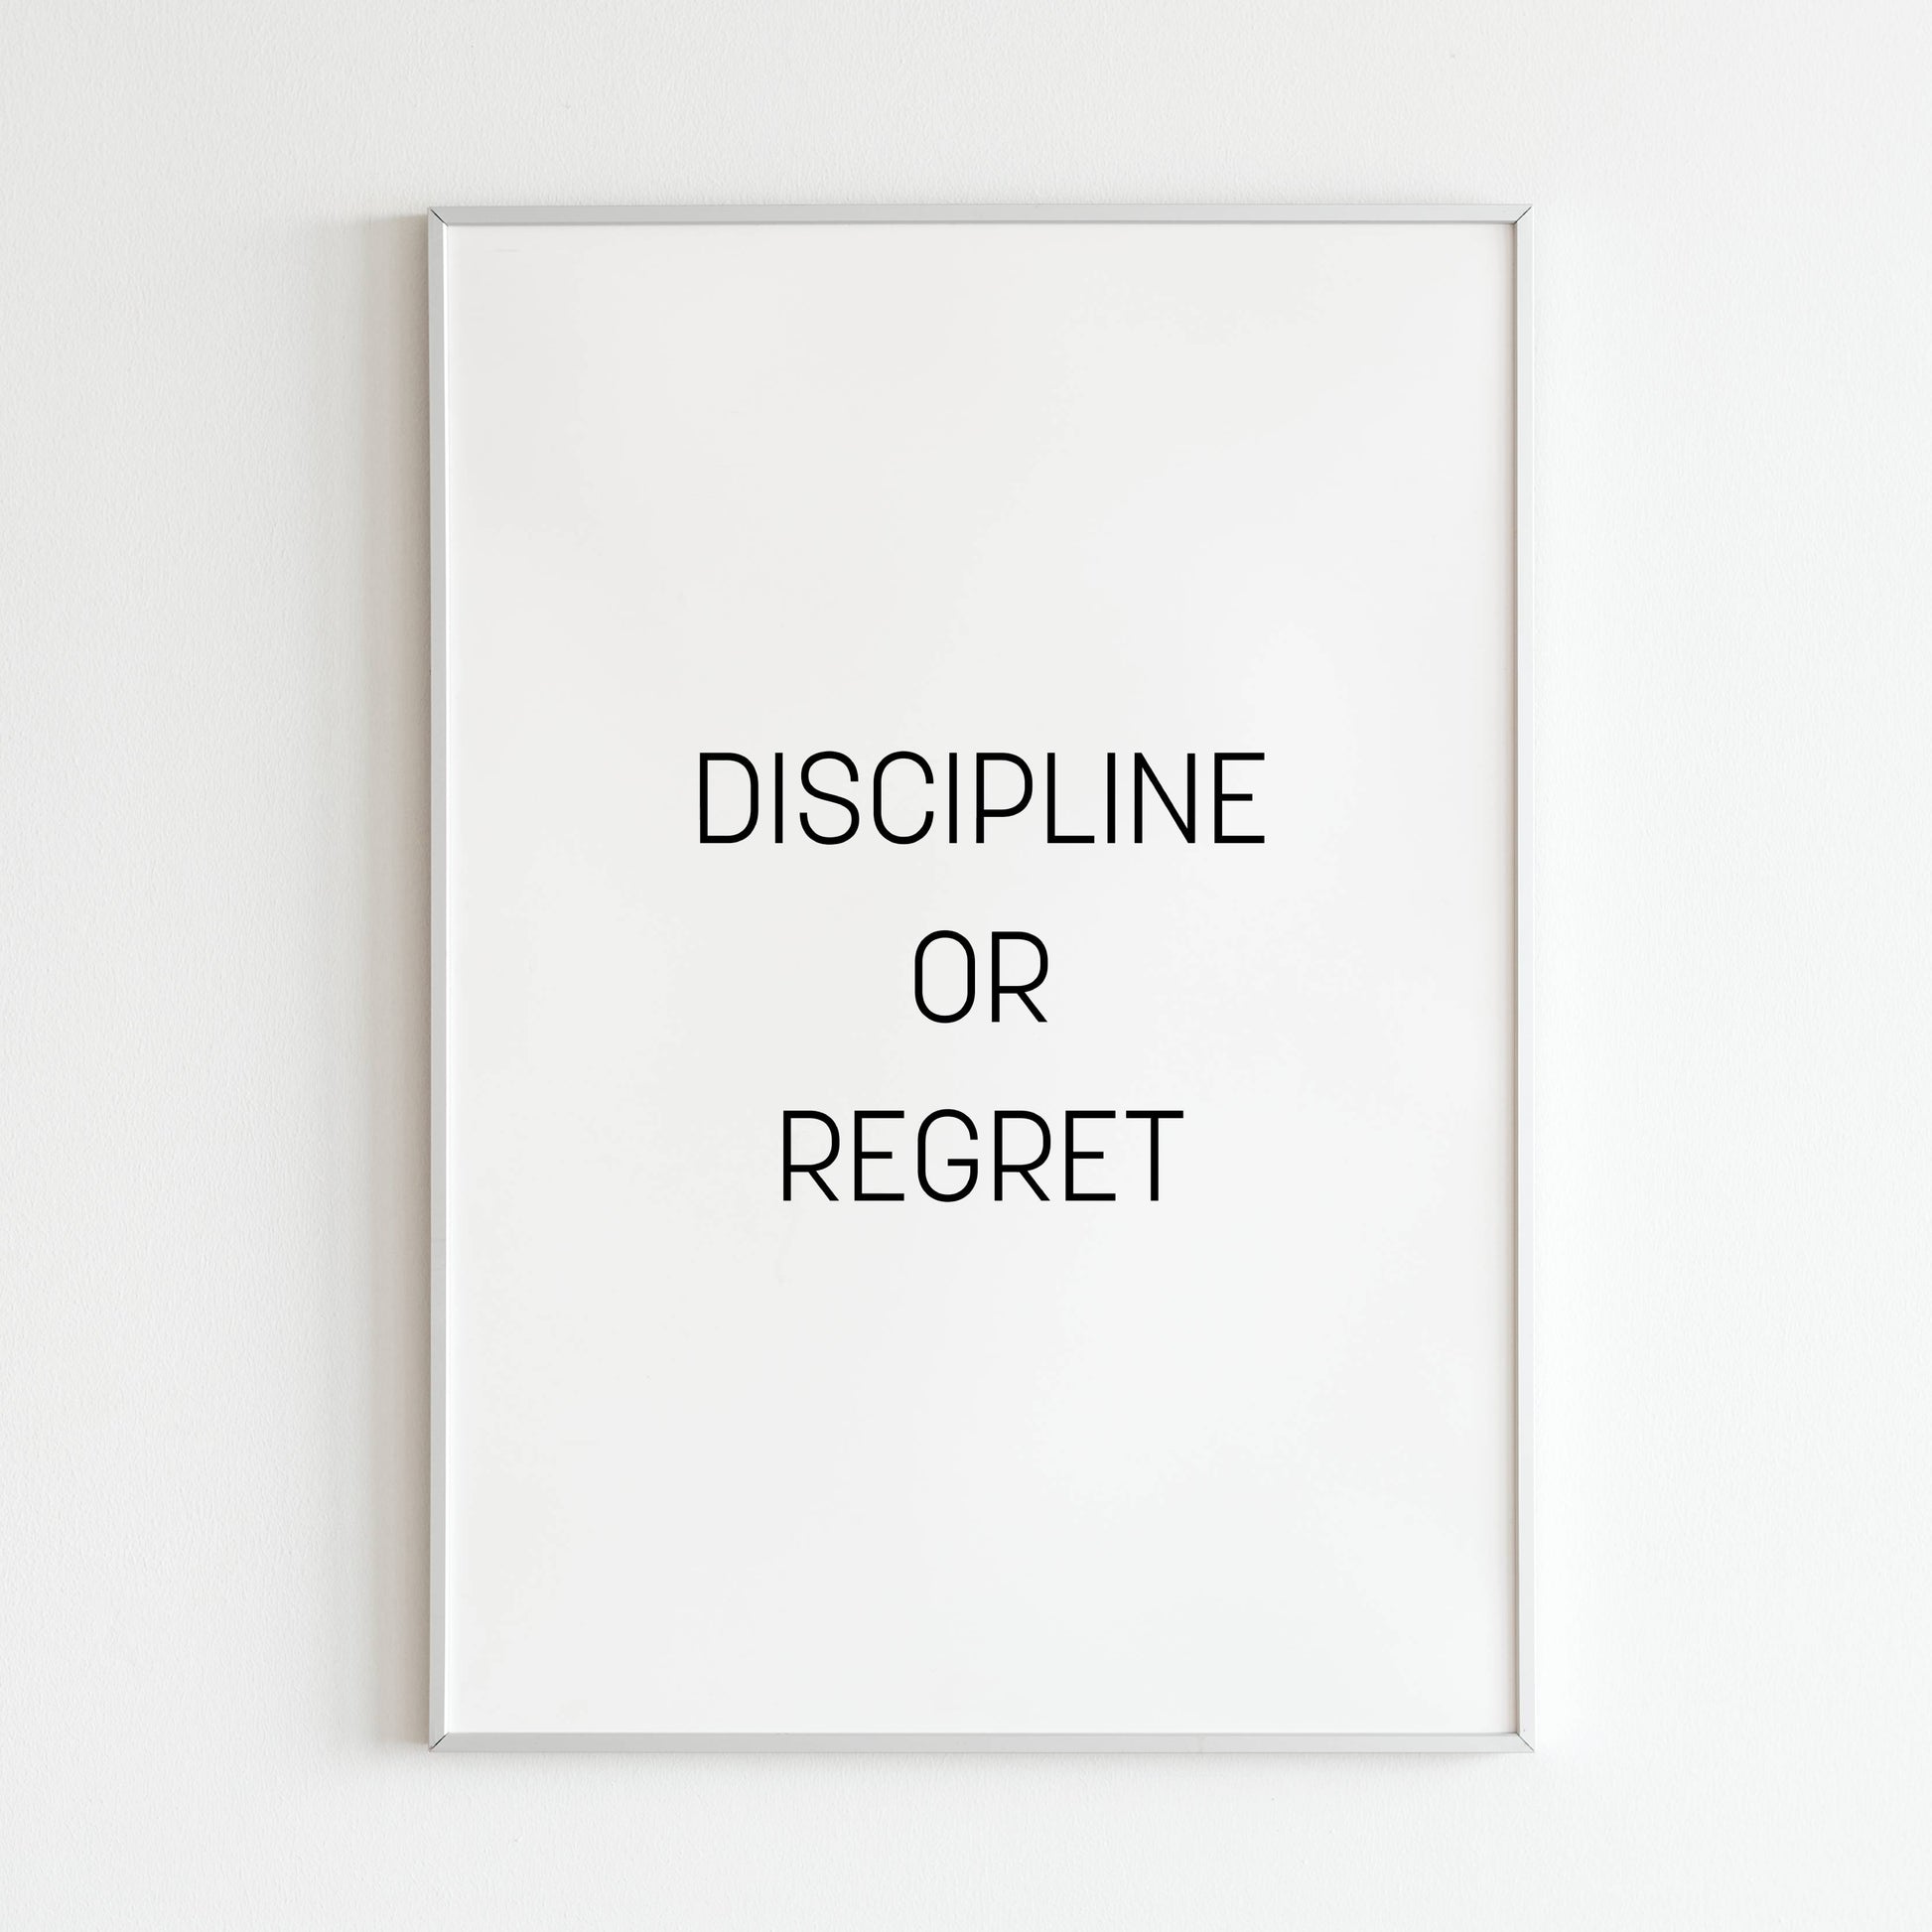 Printable discipline quote poster - Uplifting typography art motivating positive choices.